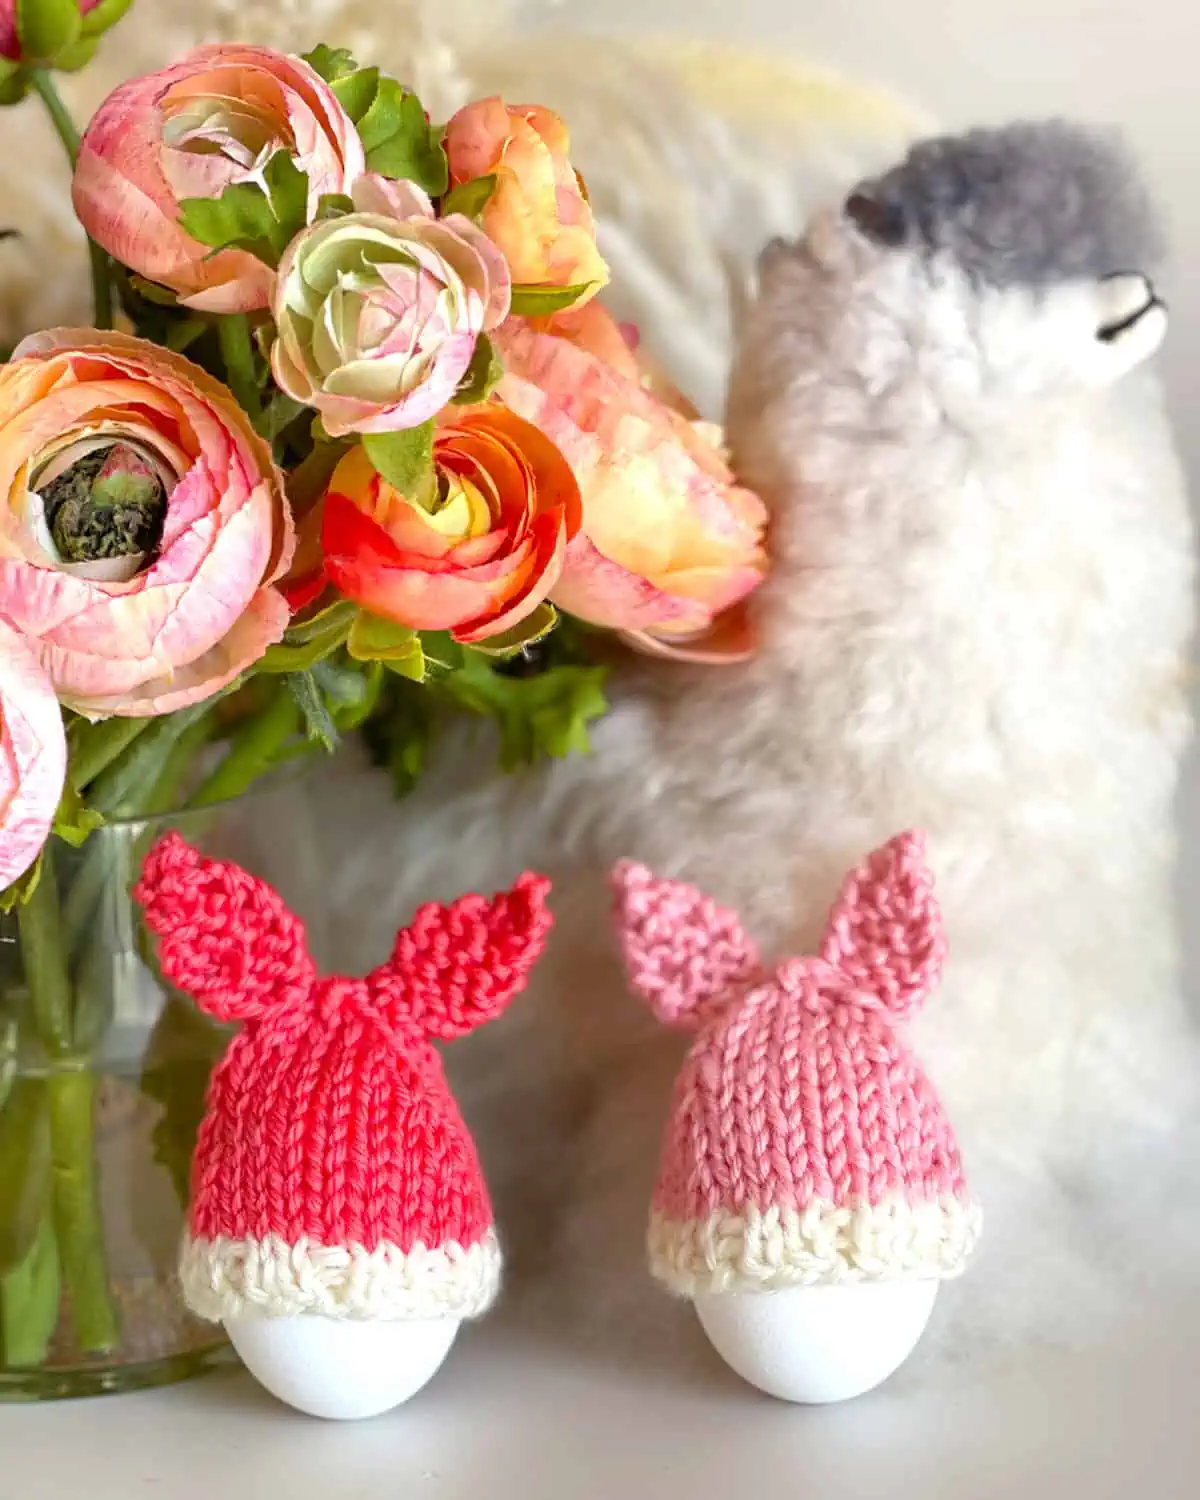 Knitted Bunny Egg Cozies in peach and pink yarn colors beside a llama toy and flower vase.